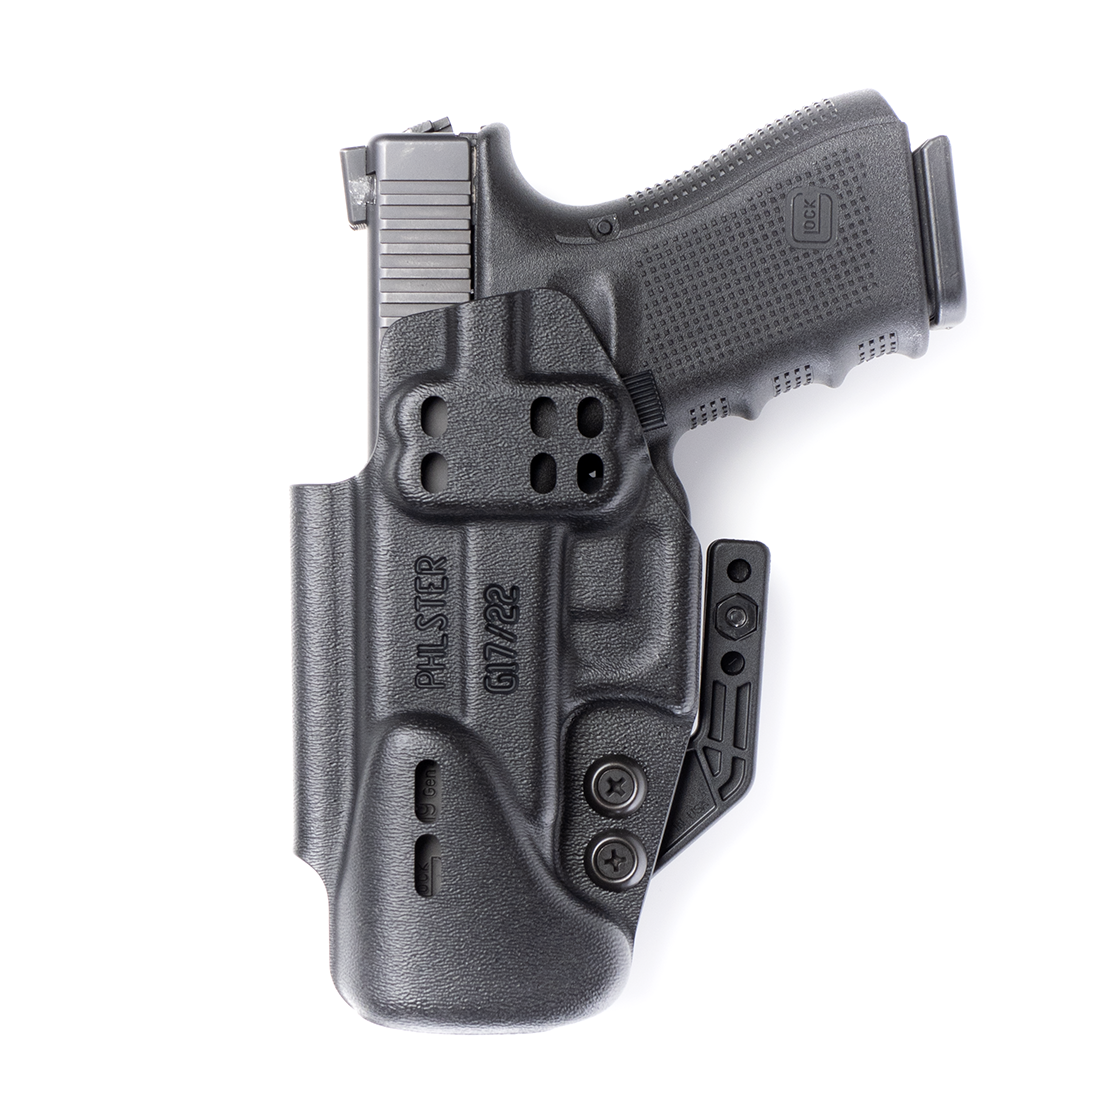 For/fits Glock 43x Zero Carry Elite In Waistband Holster for concealed carry 